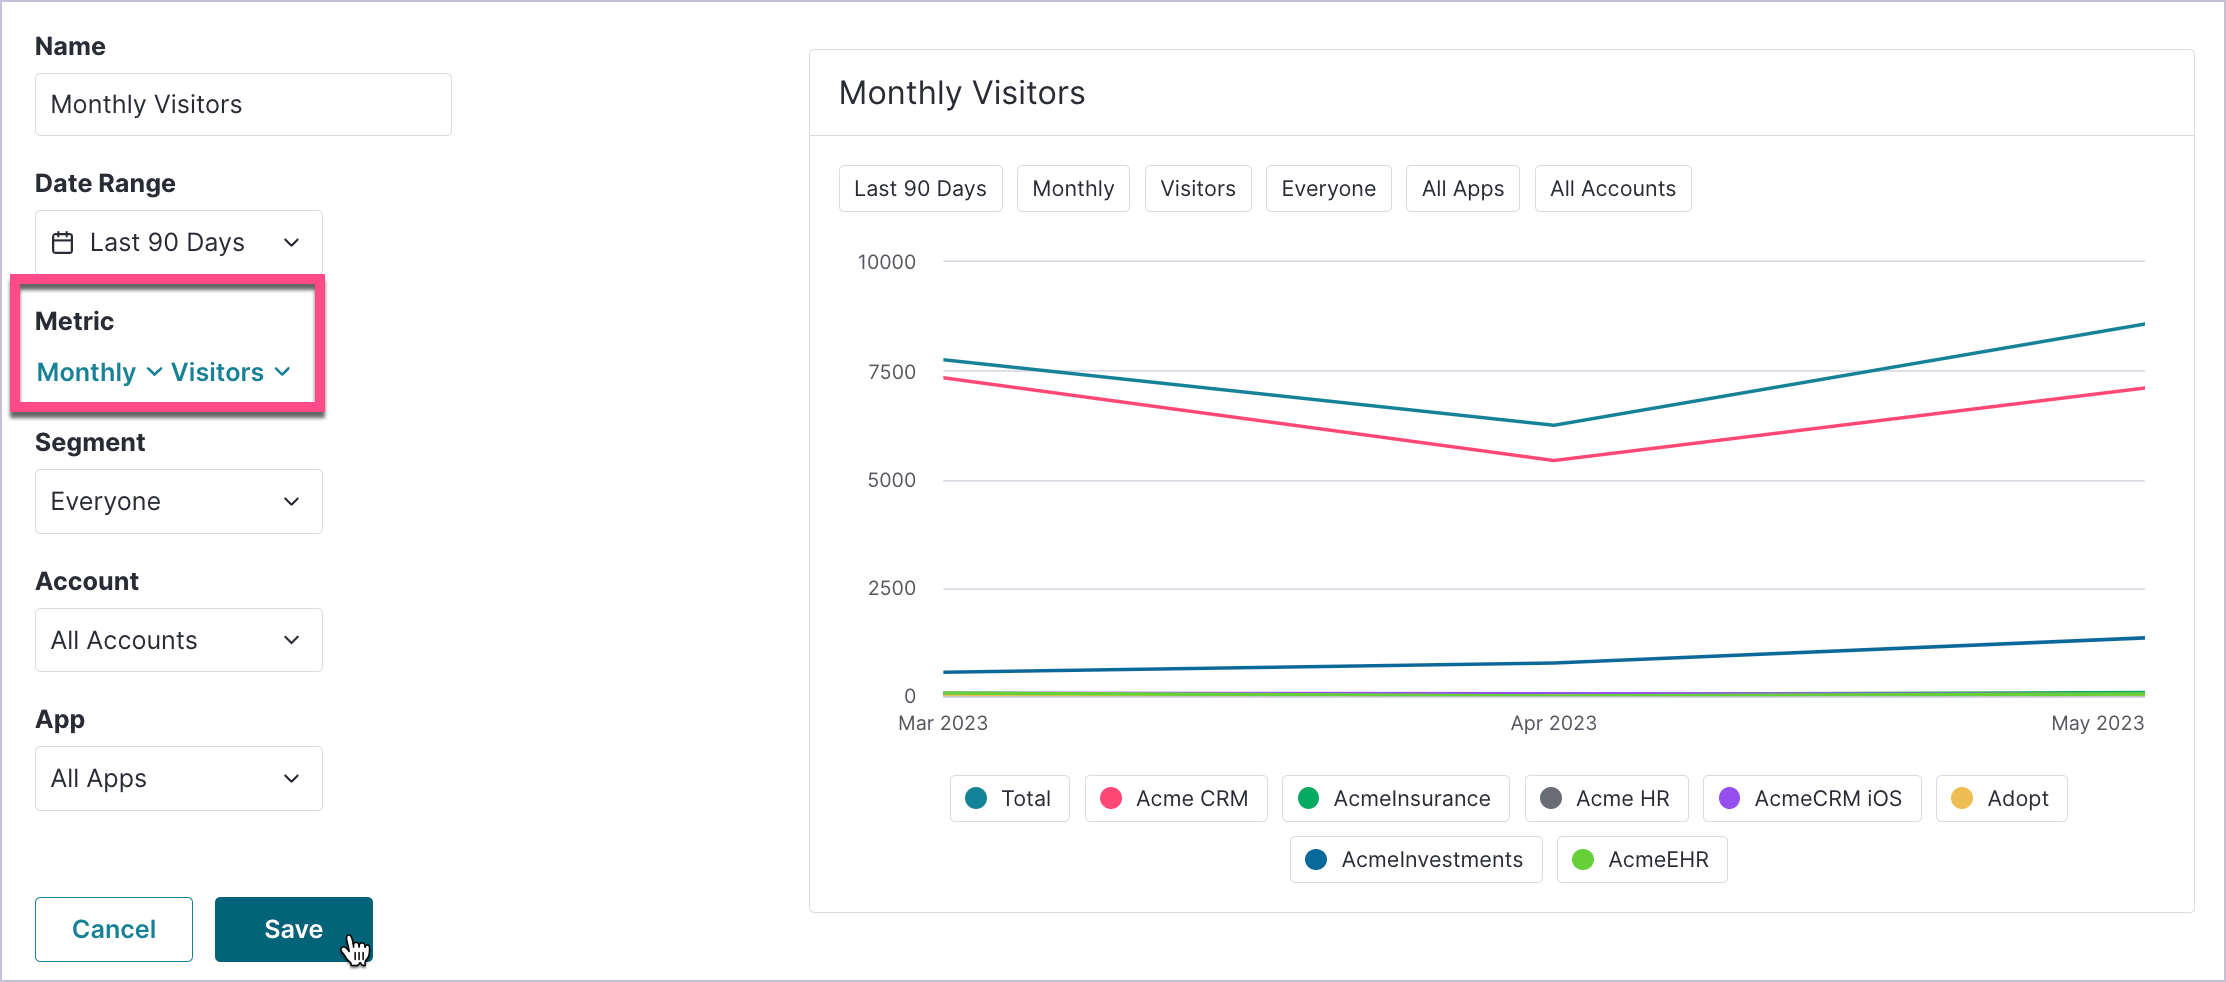 Engage_Dashboard_WeeklyVisitors_Monthly.png